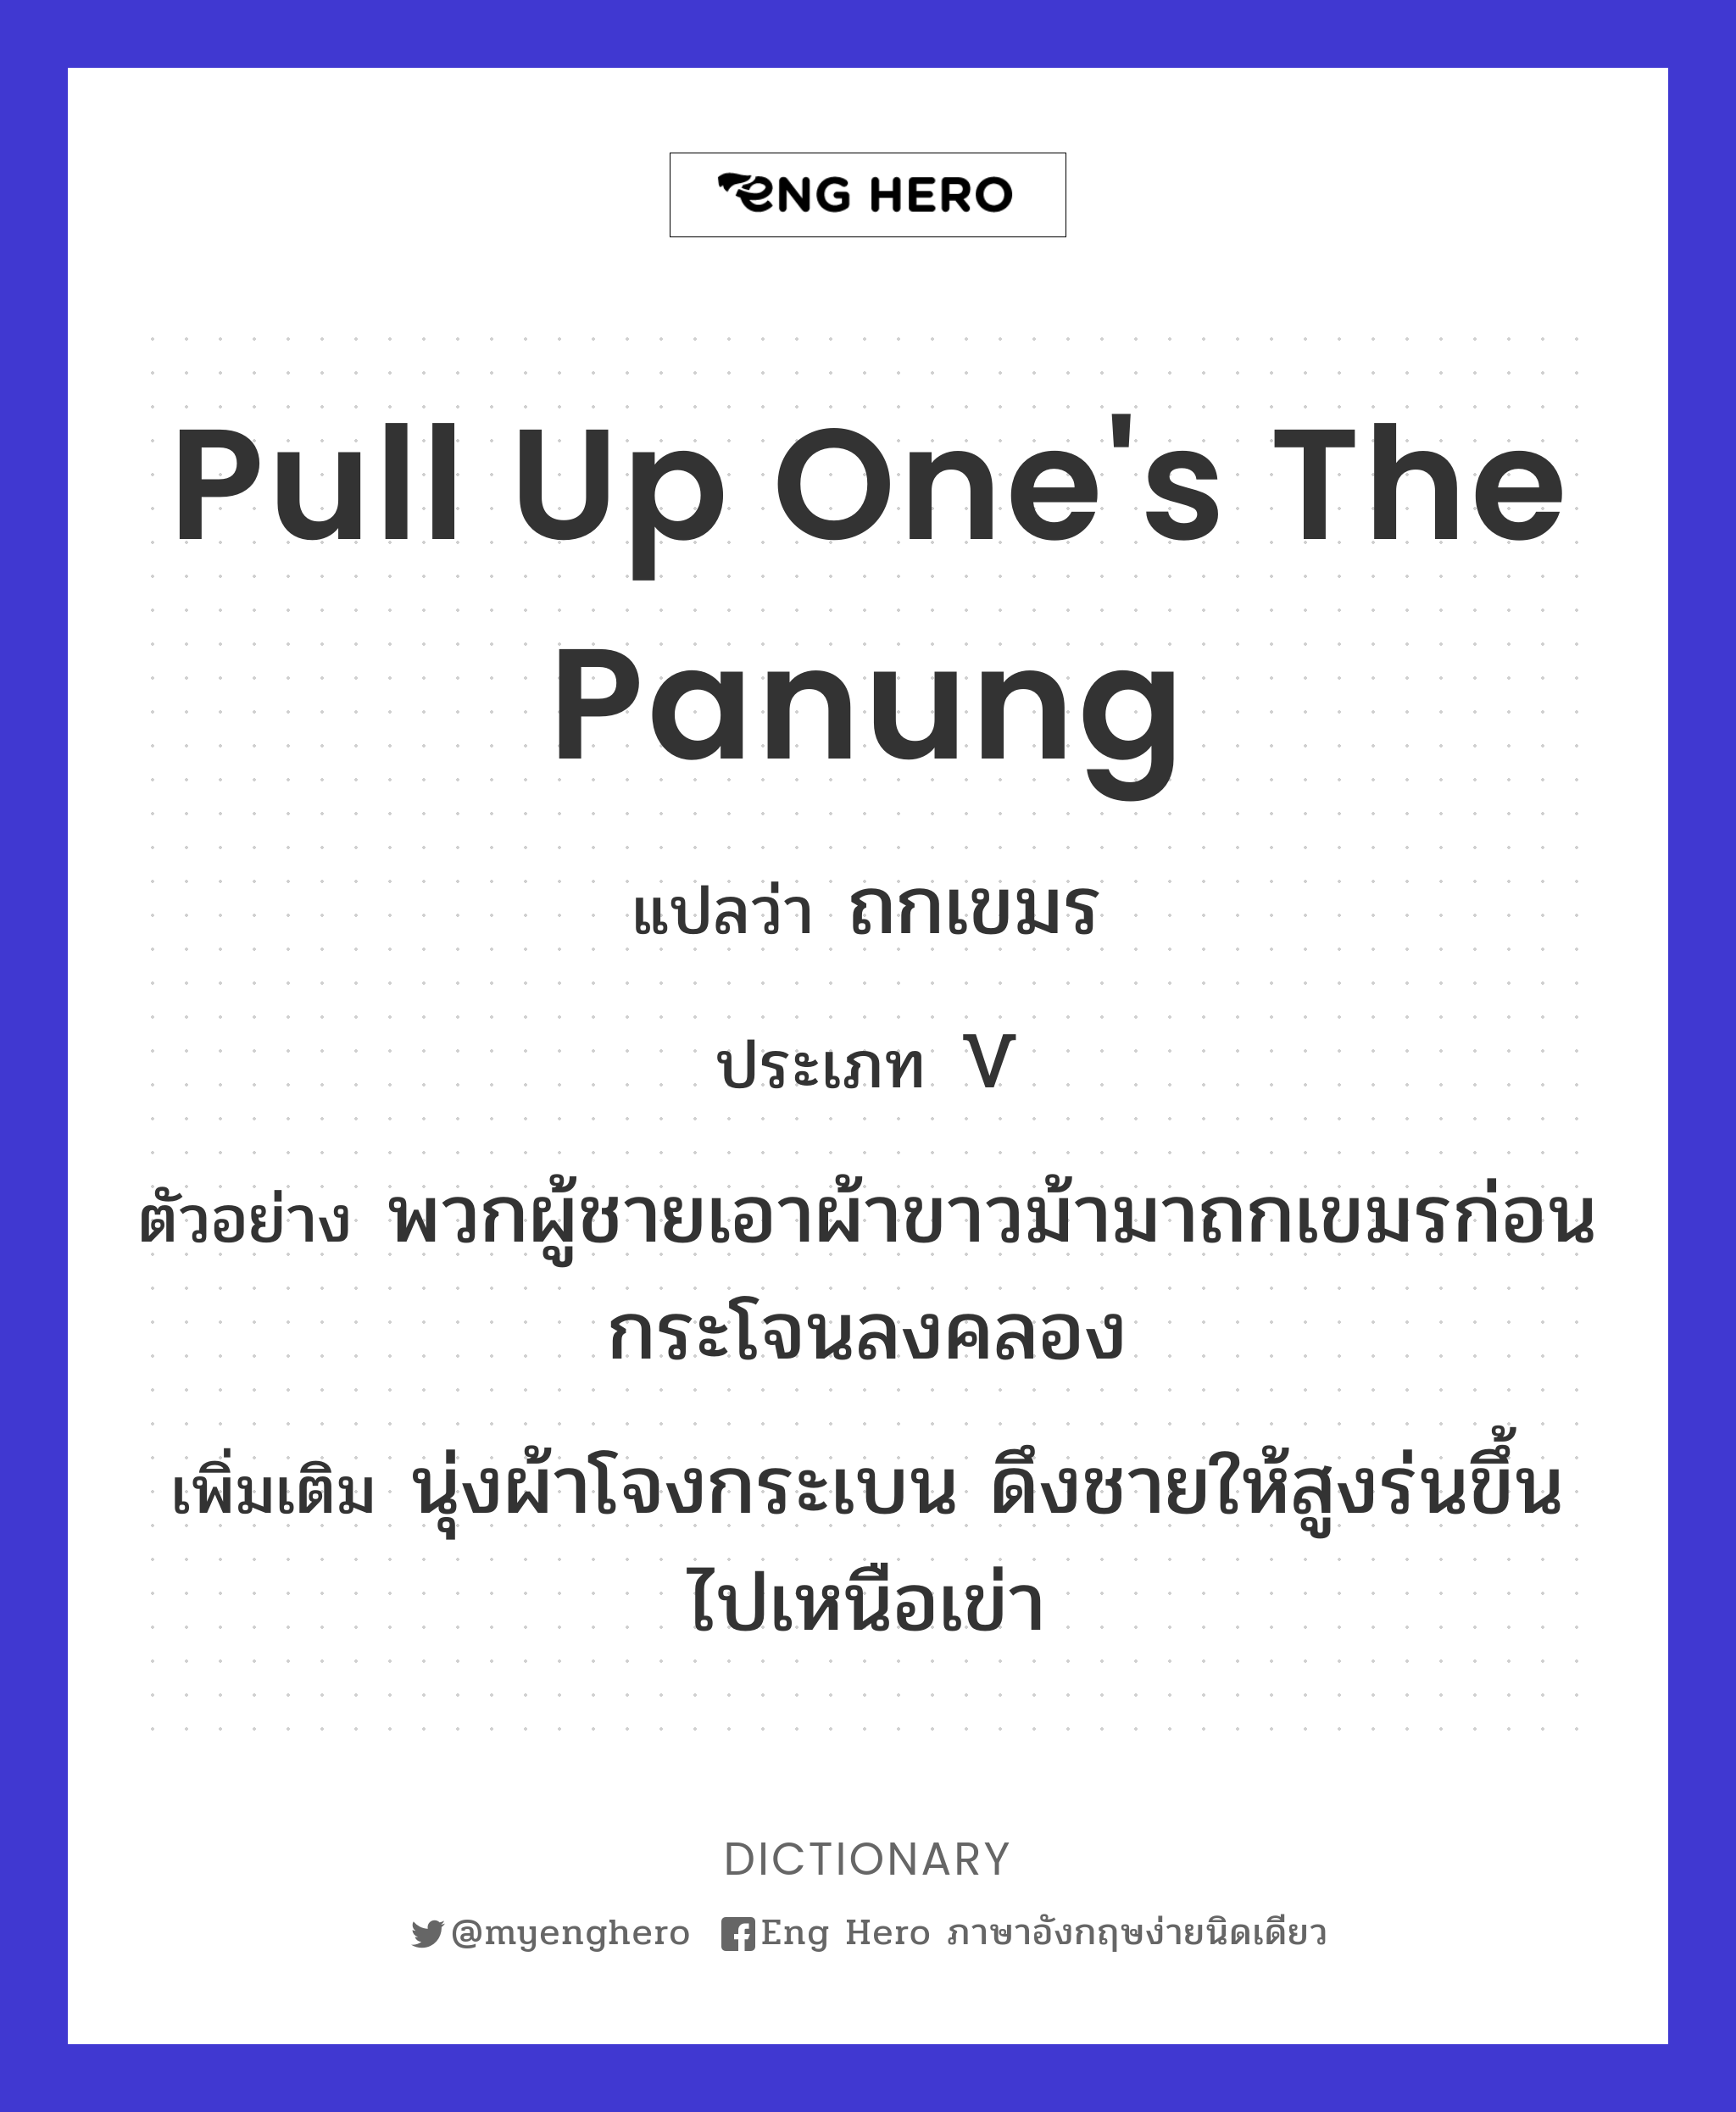 pull up one's the panung